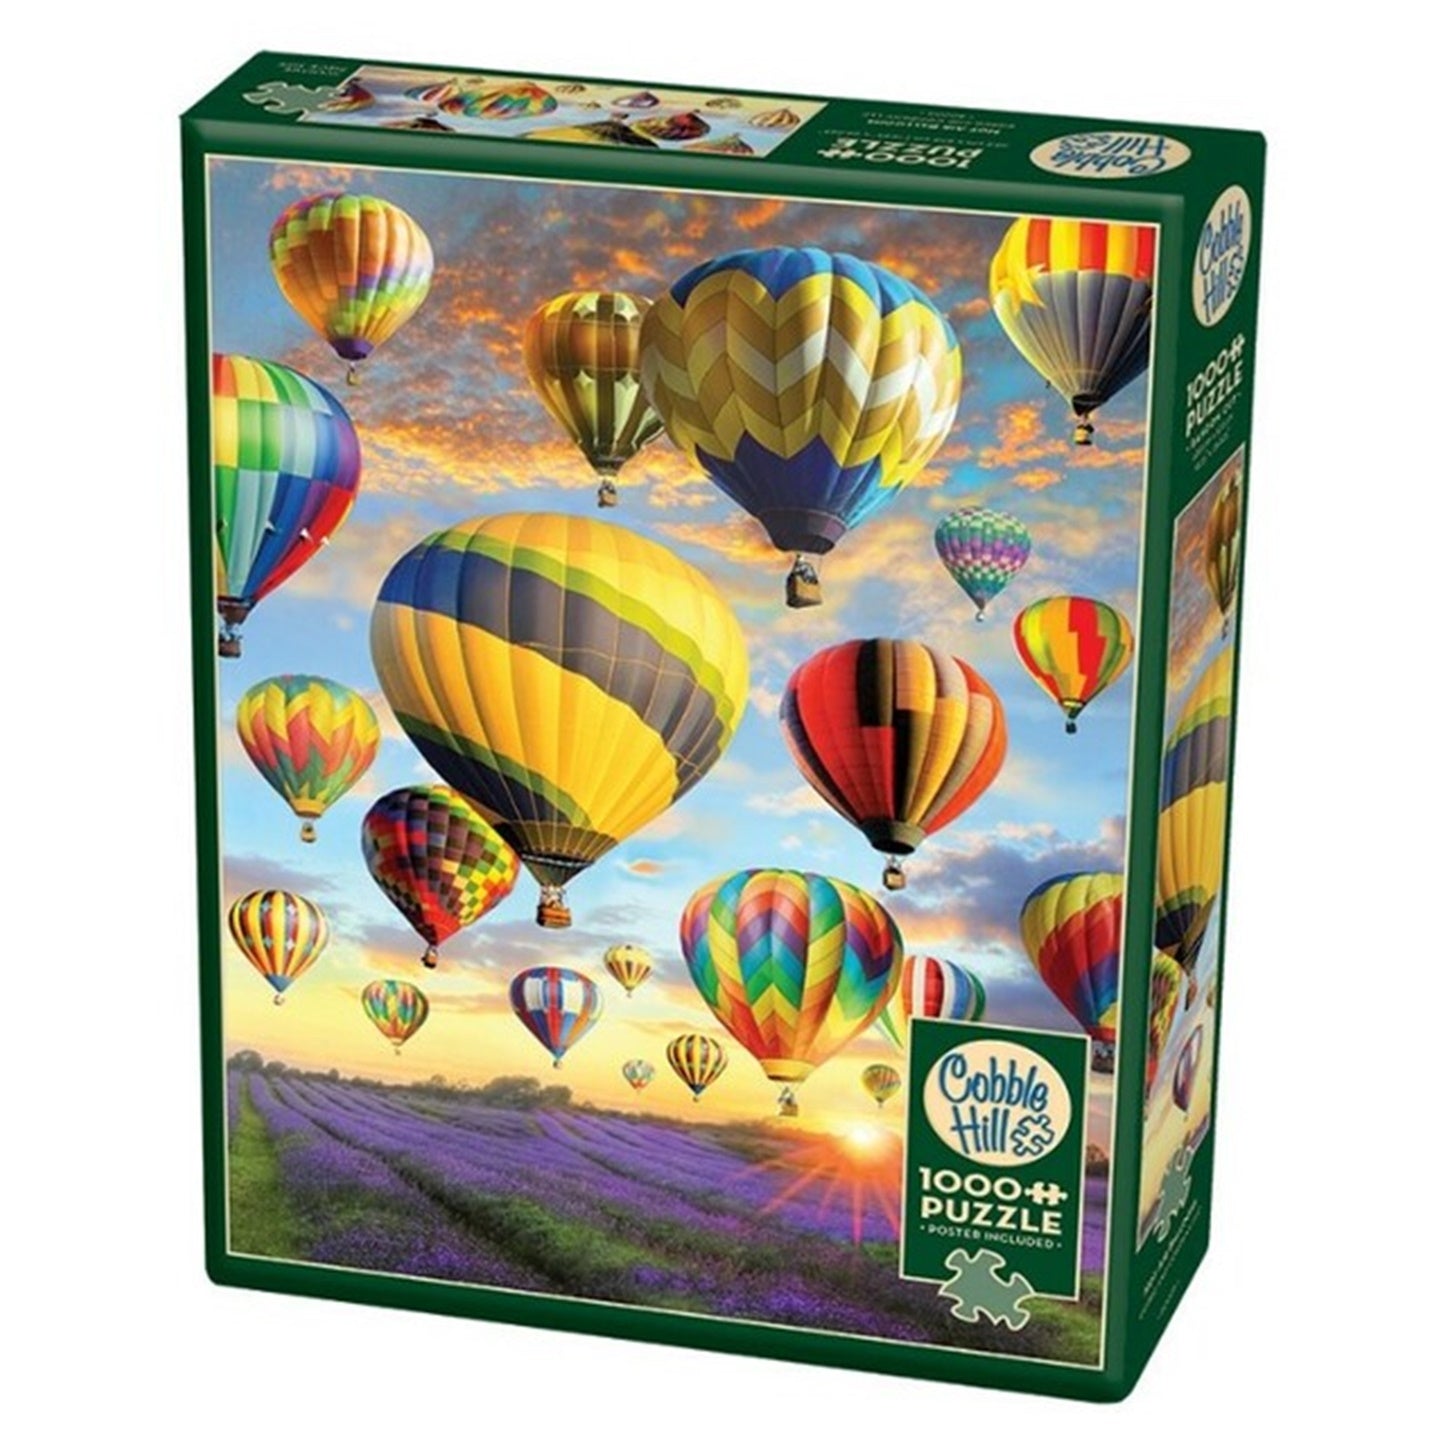 Puzzle - Hot Air Balloons - 1000 Piece